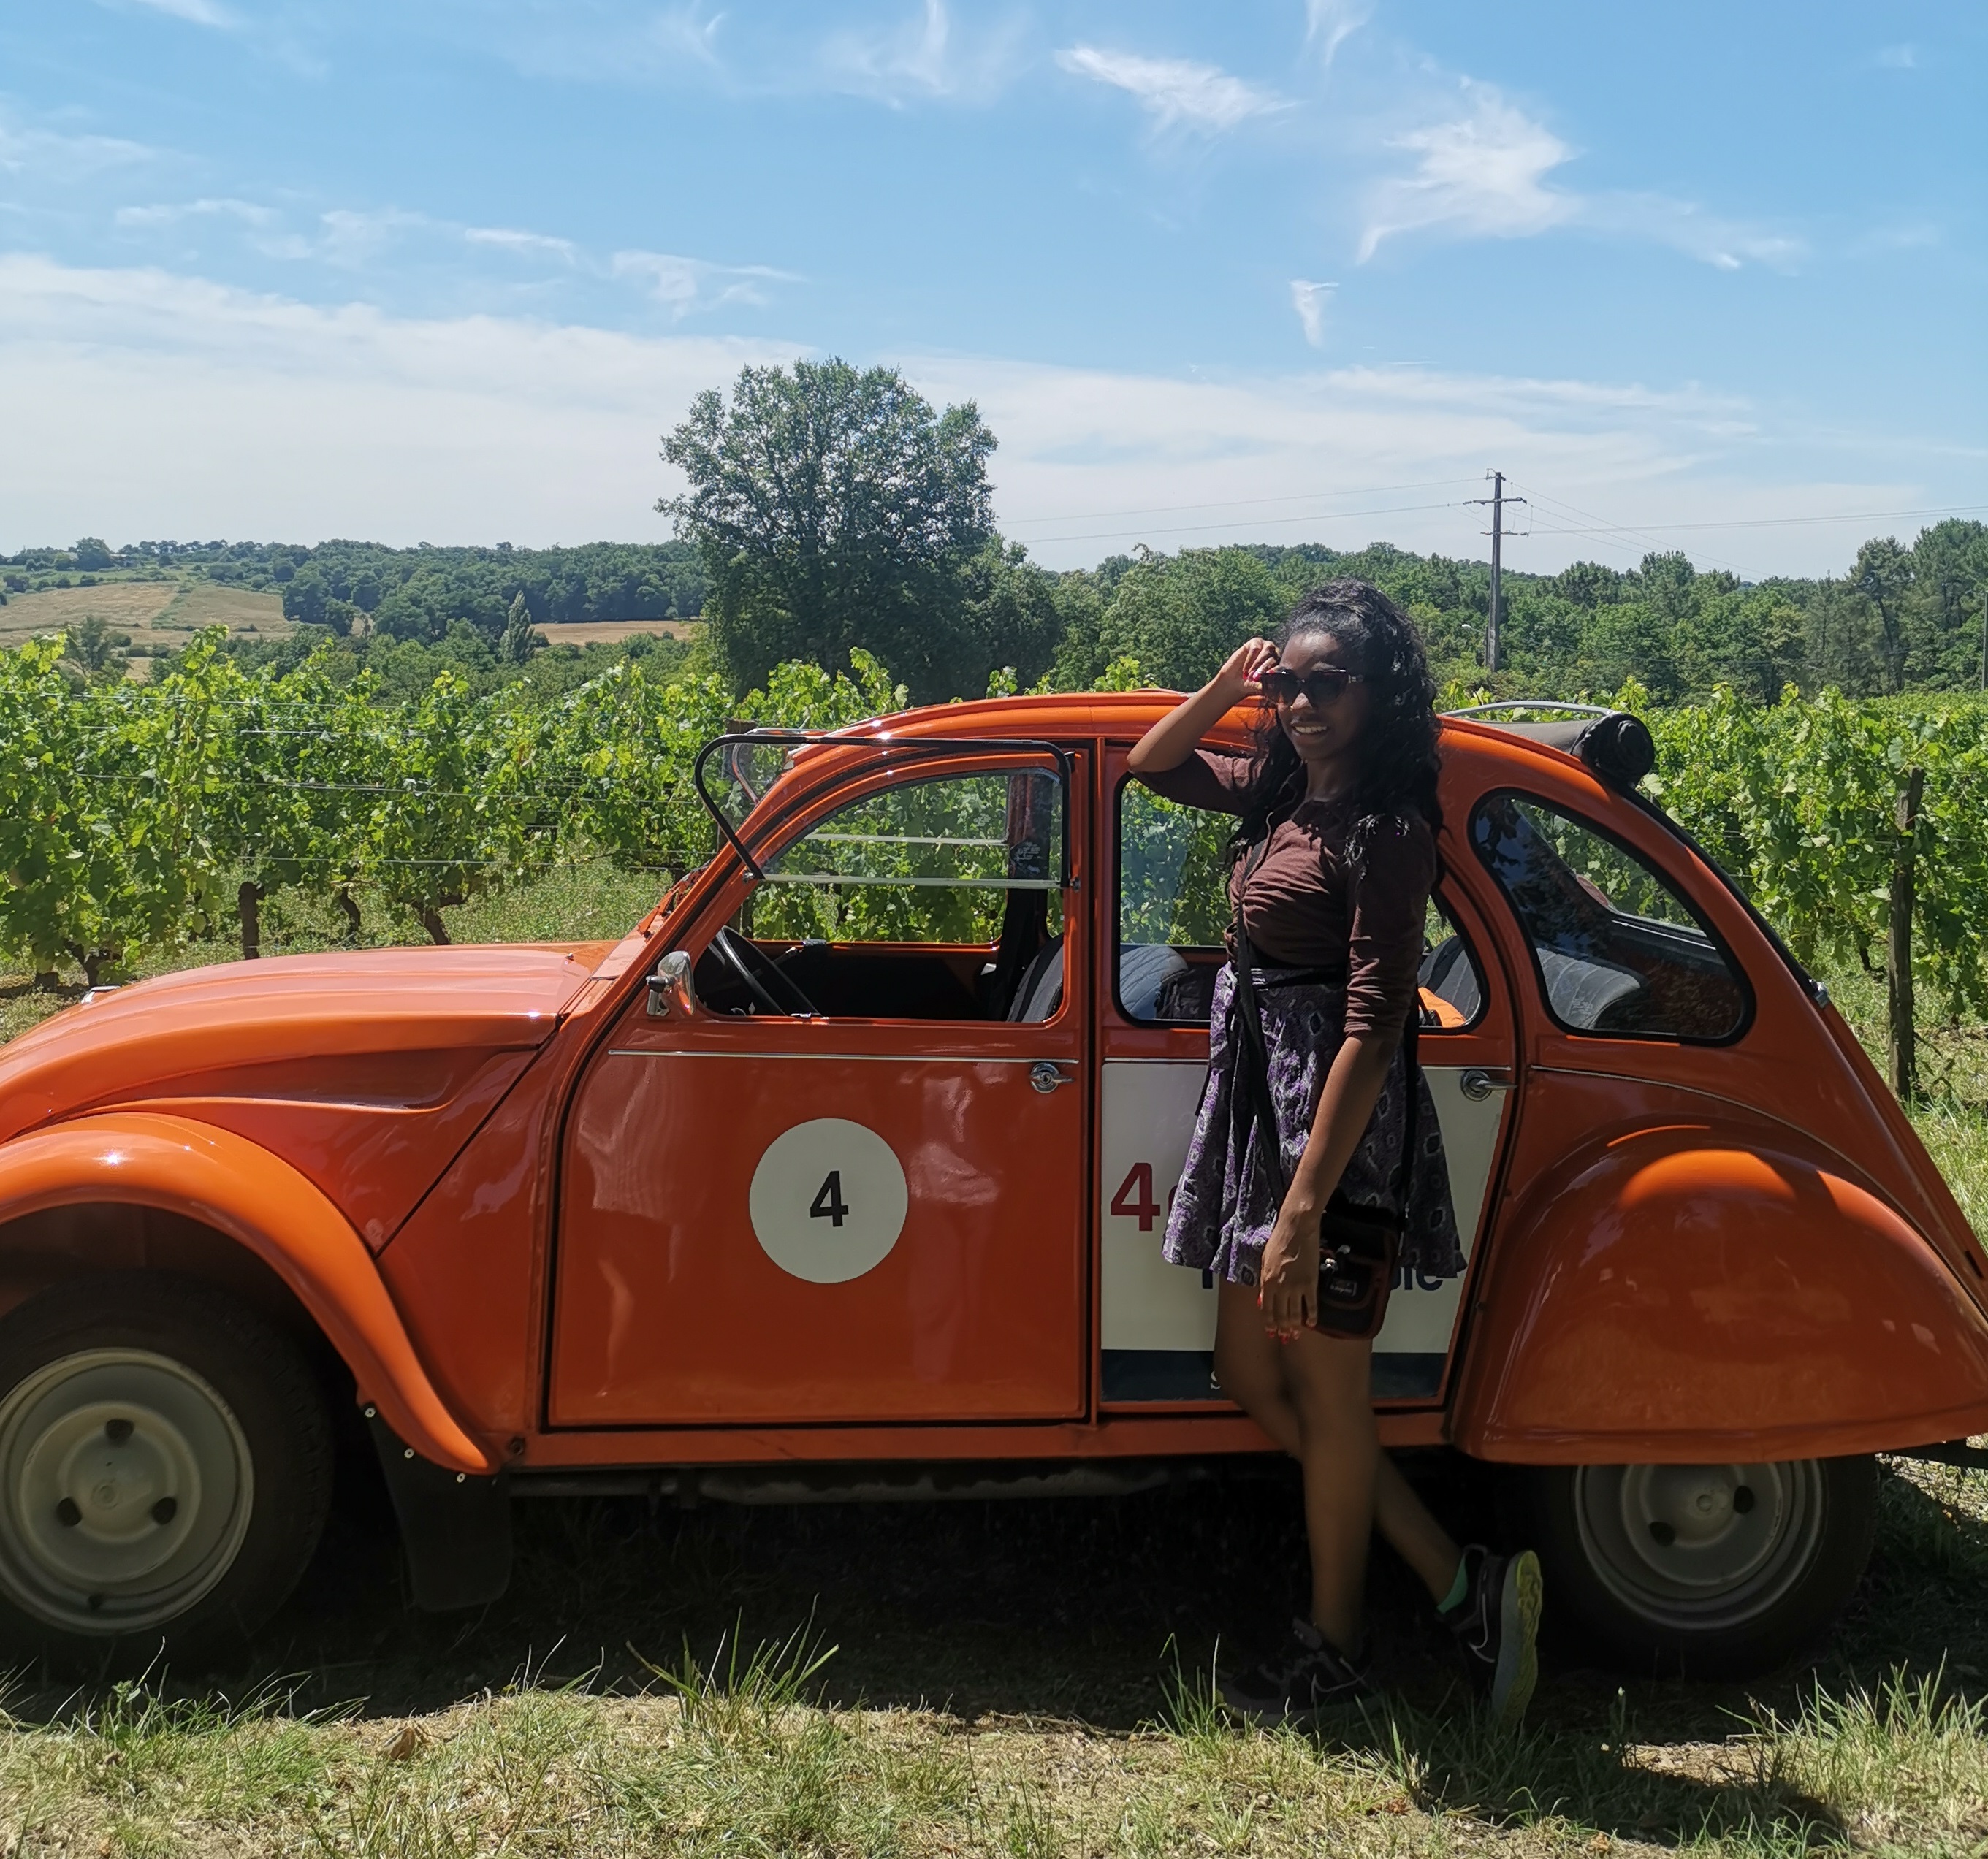 Rochelle wearing sunglasses on a sunny day, standing by a classic car in beautiful scenery near Paris